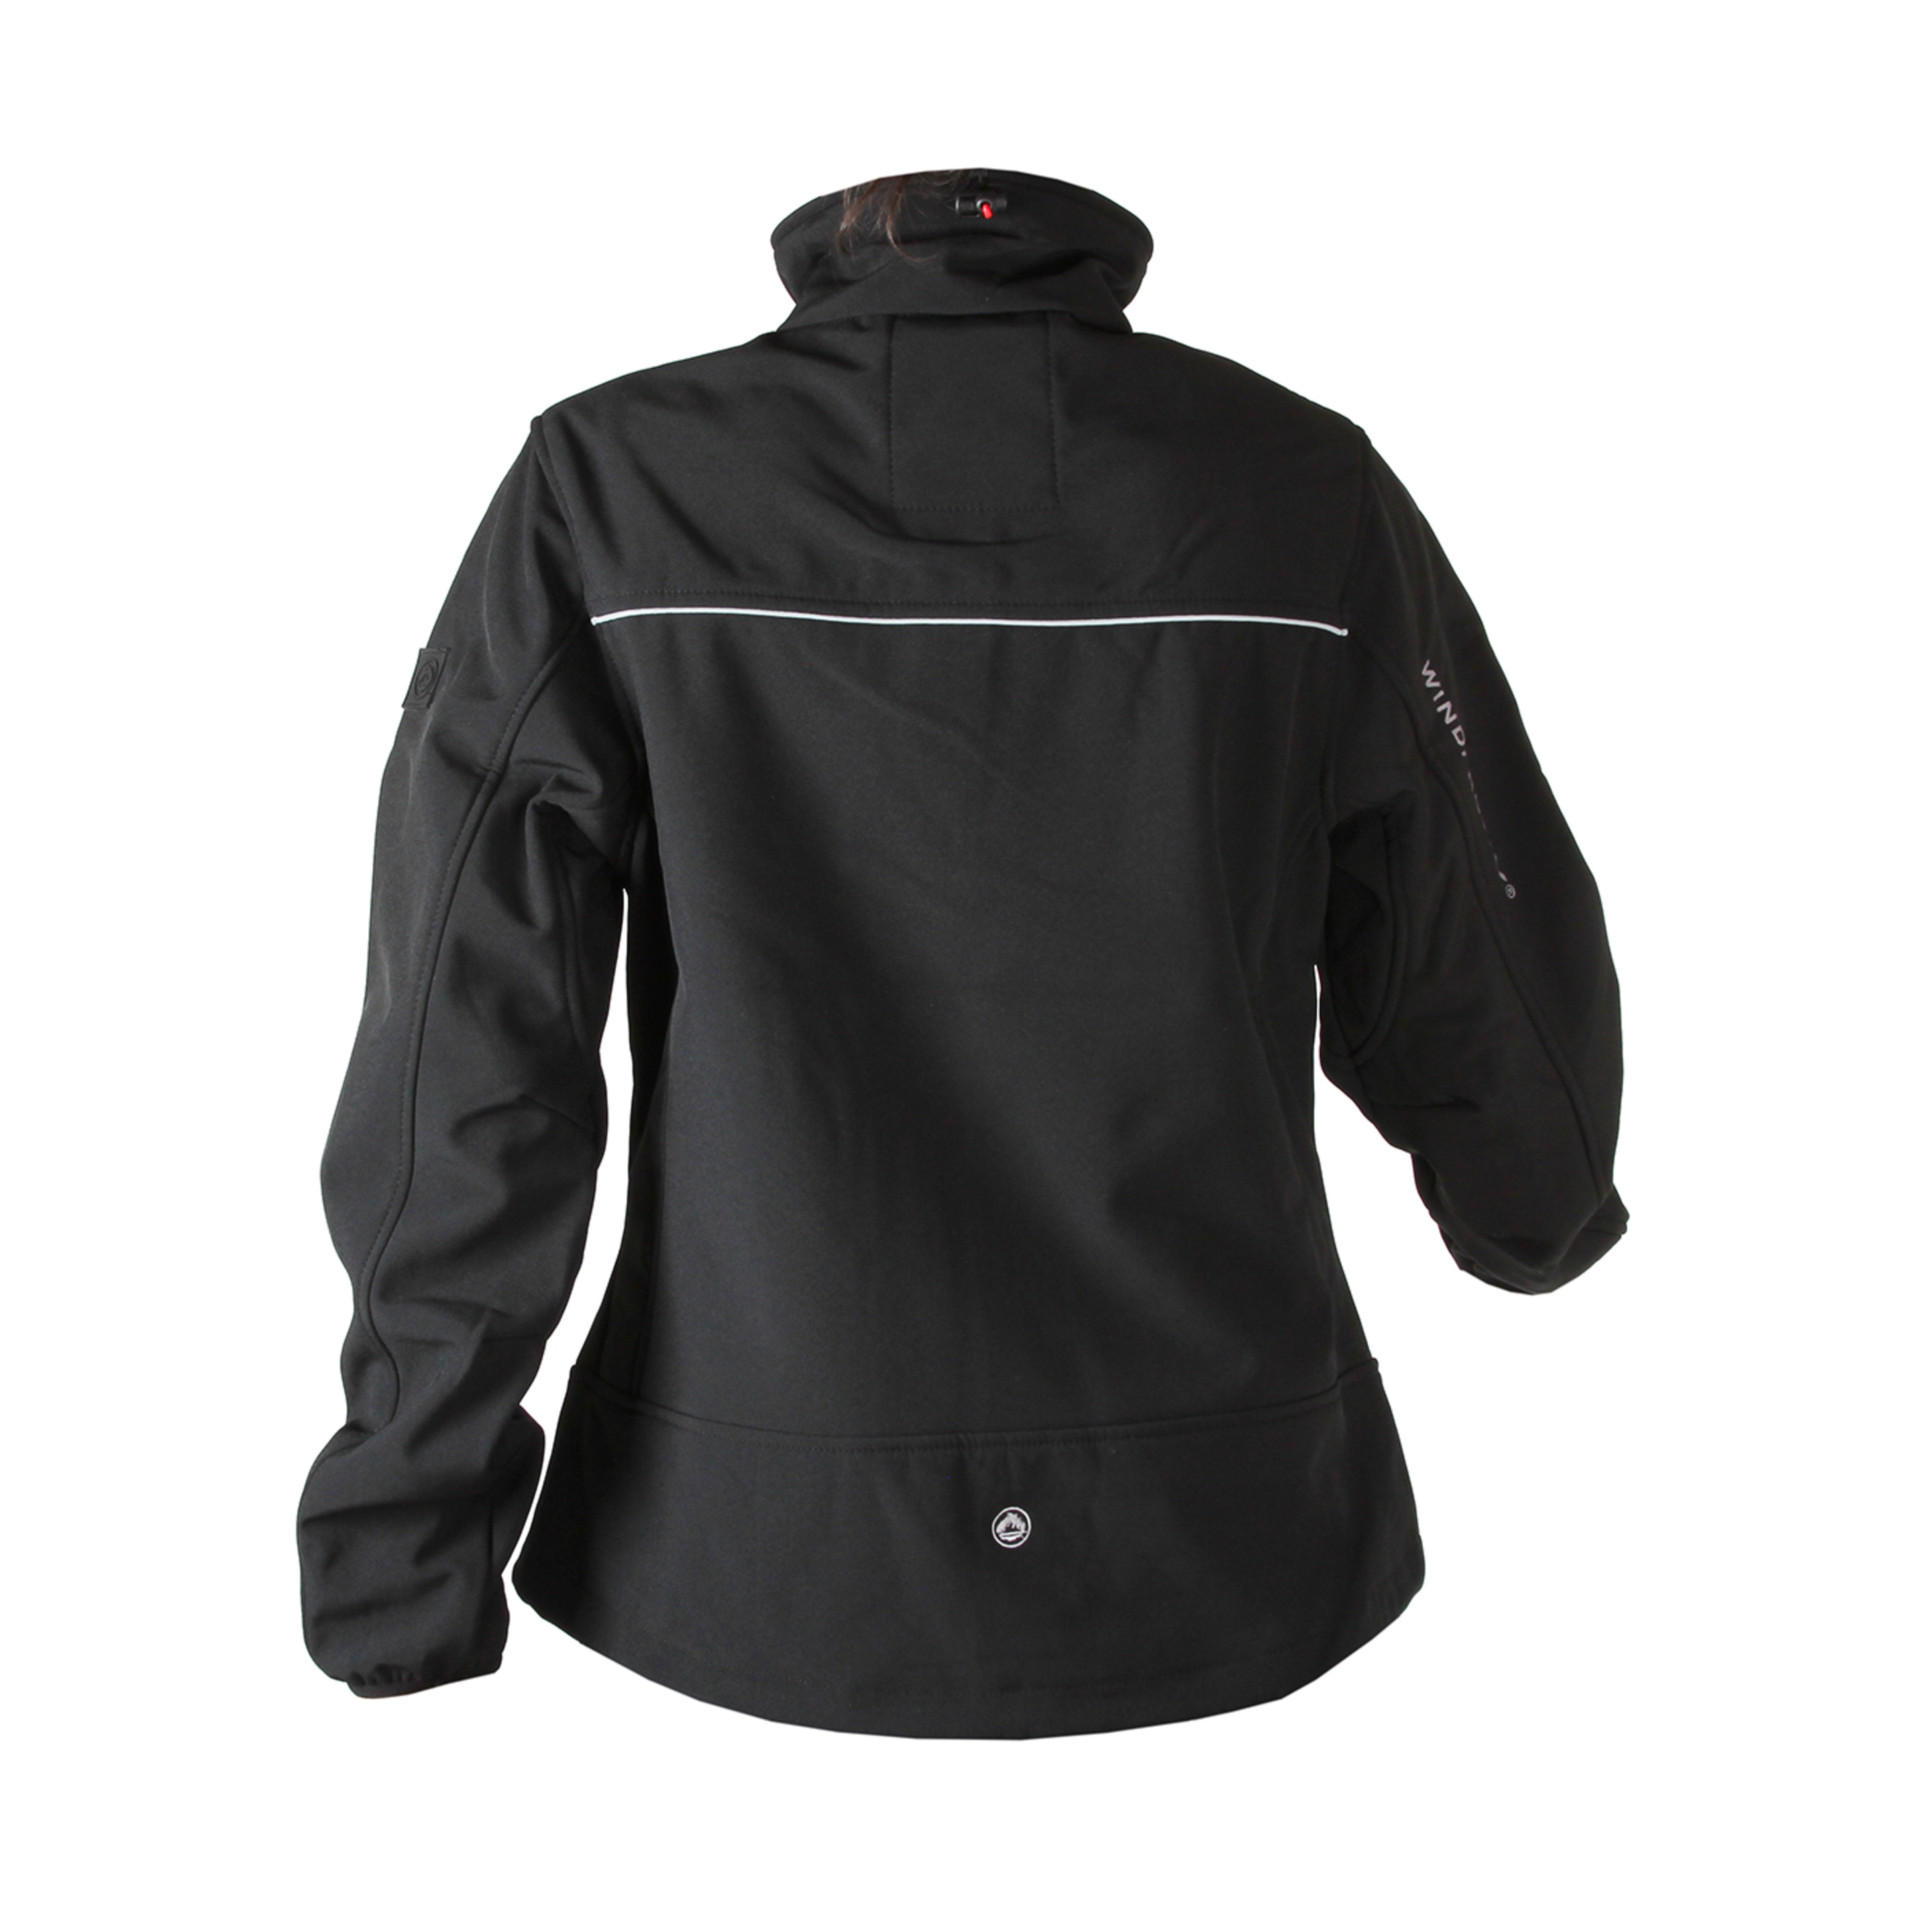 Chaqueta Softshell Ds5502 Mujer Outlet J'Hayber - Negro - Trekking Montaña Mujer  MKP